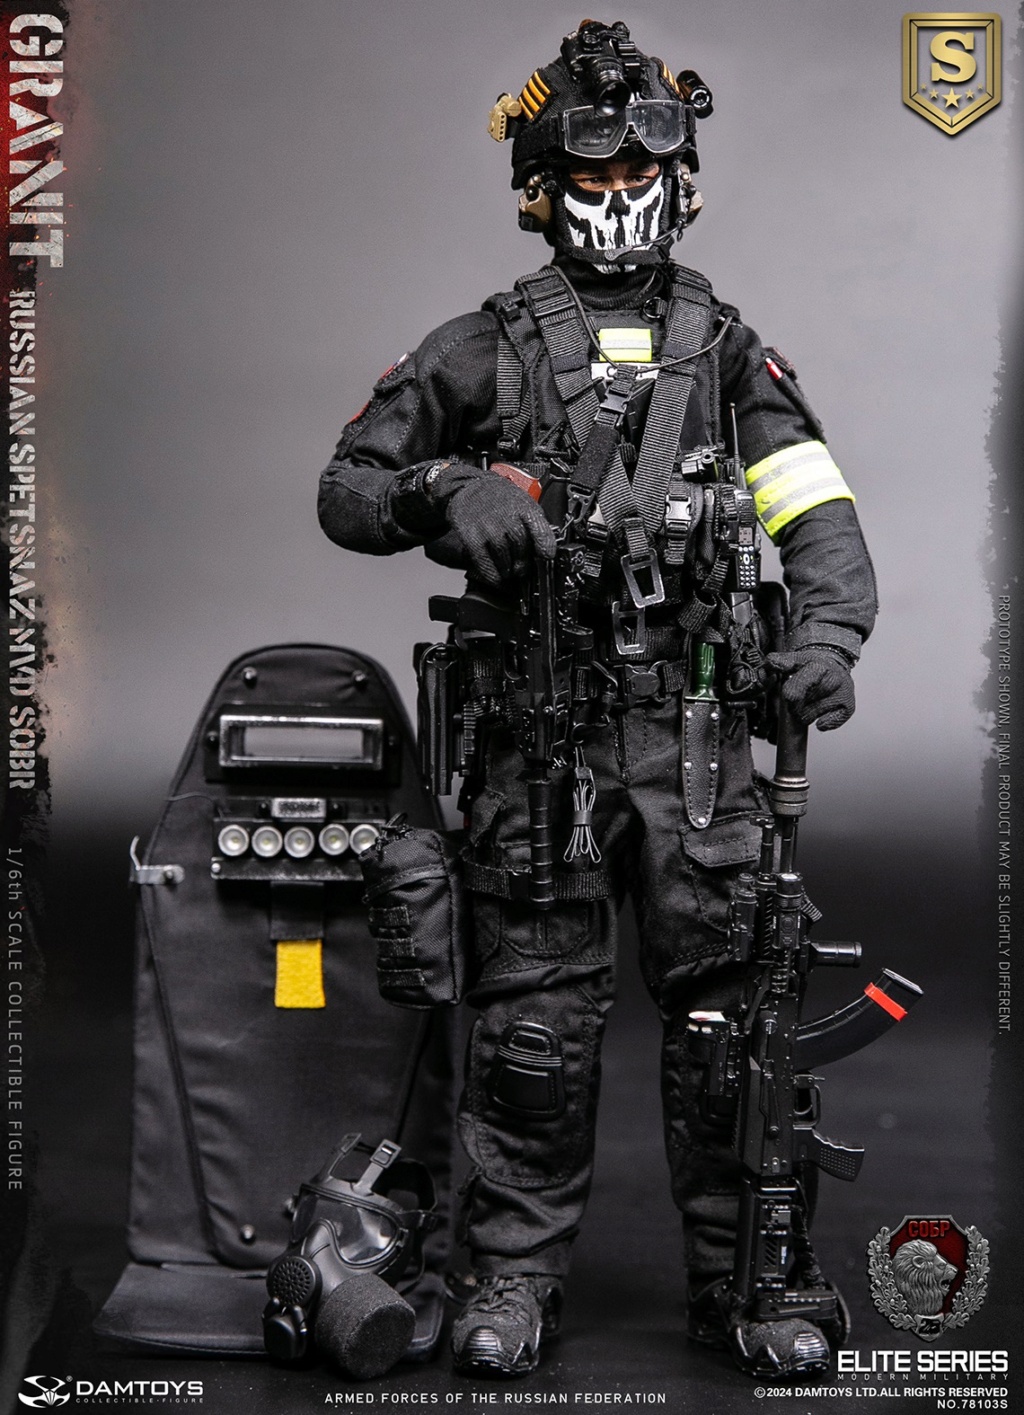 MVD - NEW PRODUCT: DAMTOYS: 1/6 Russian Federation Ministry of Internal Affairs MVD-Granite Special Response Team 78103S Special Edition/Elite Edition 11393010